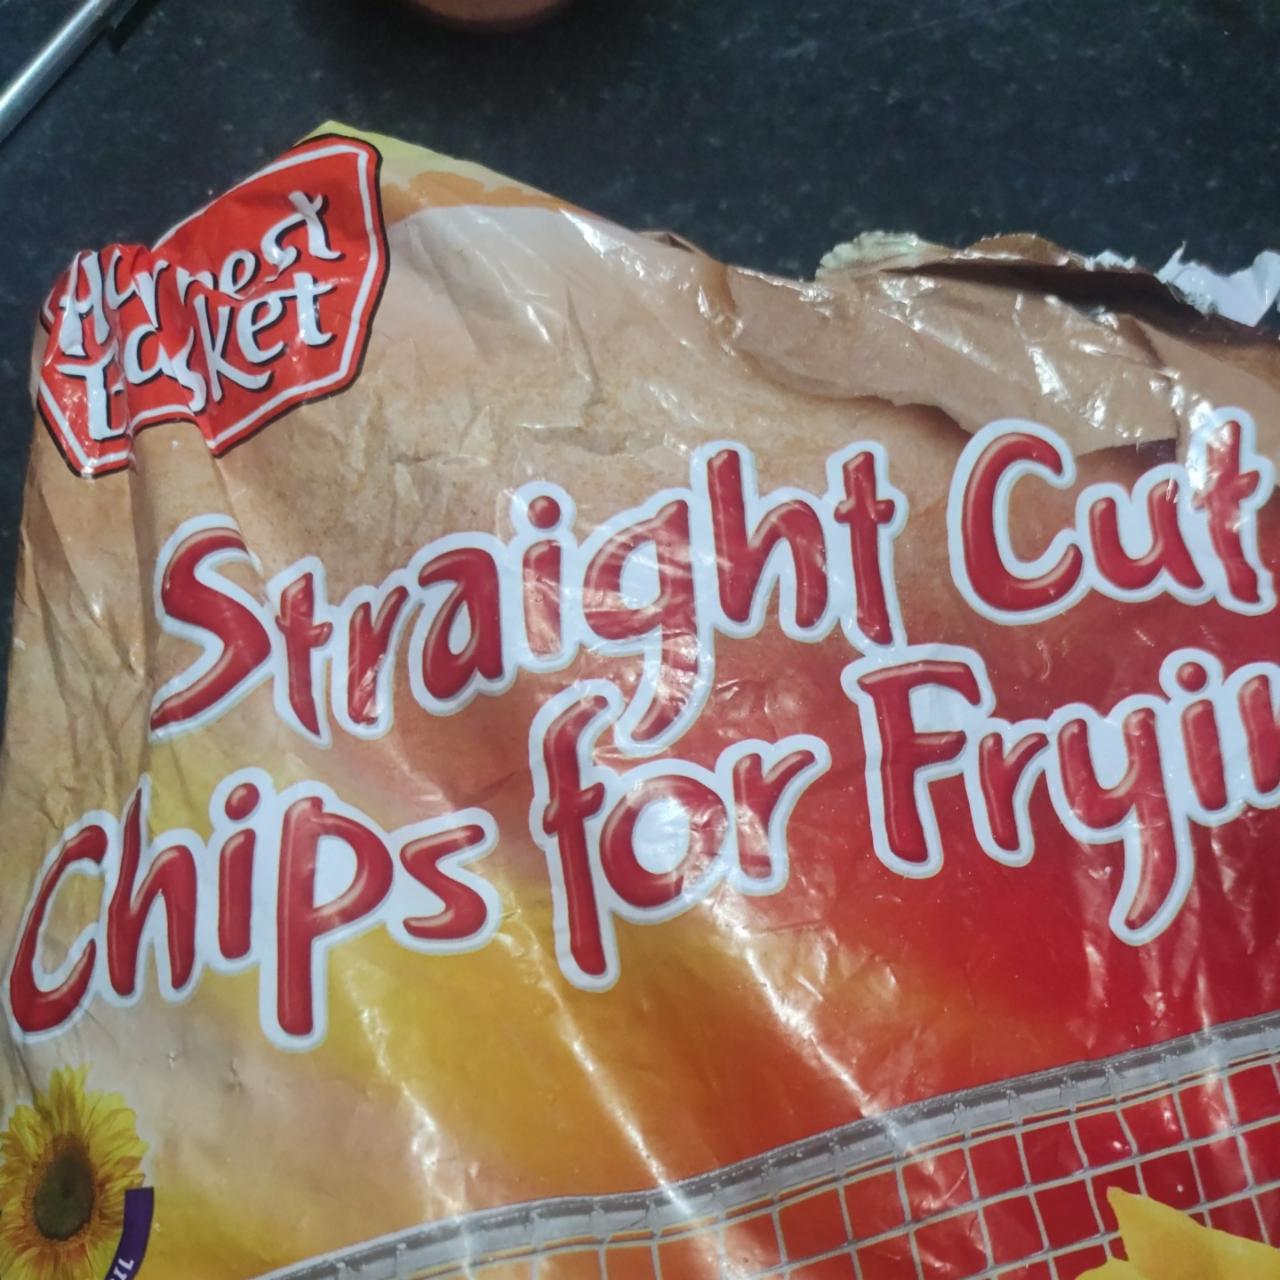 Zdjęcia - straight cut chips for frying lidl